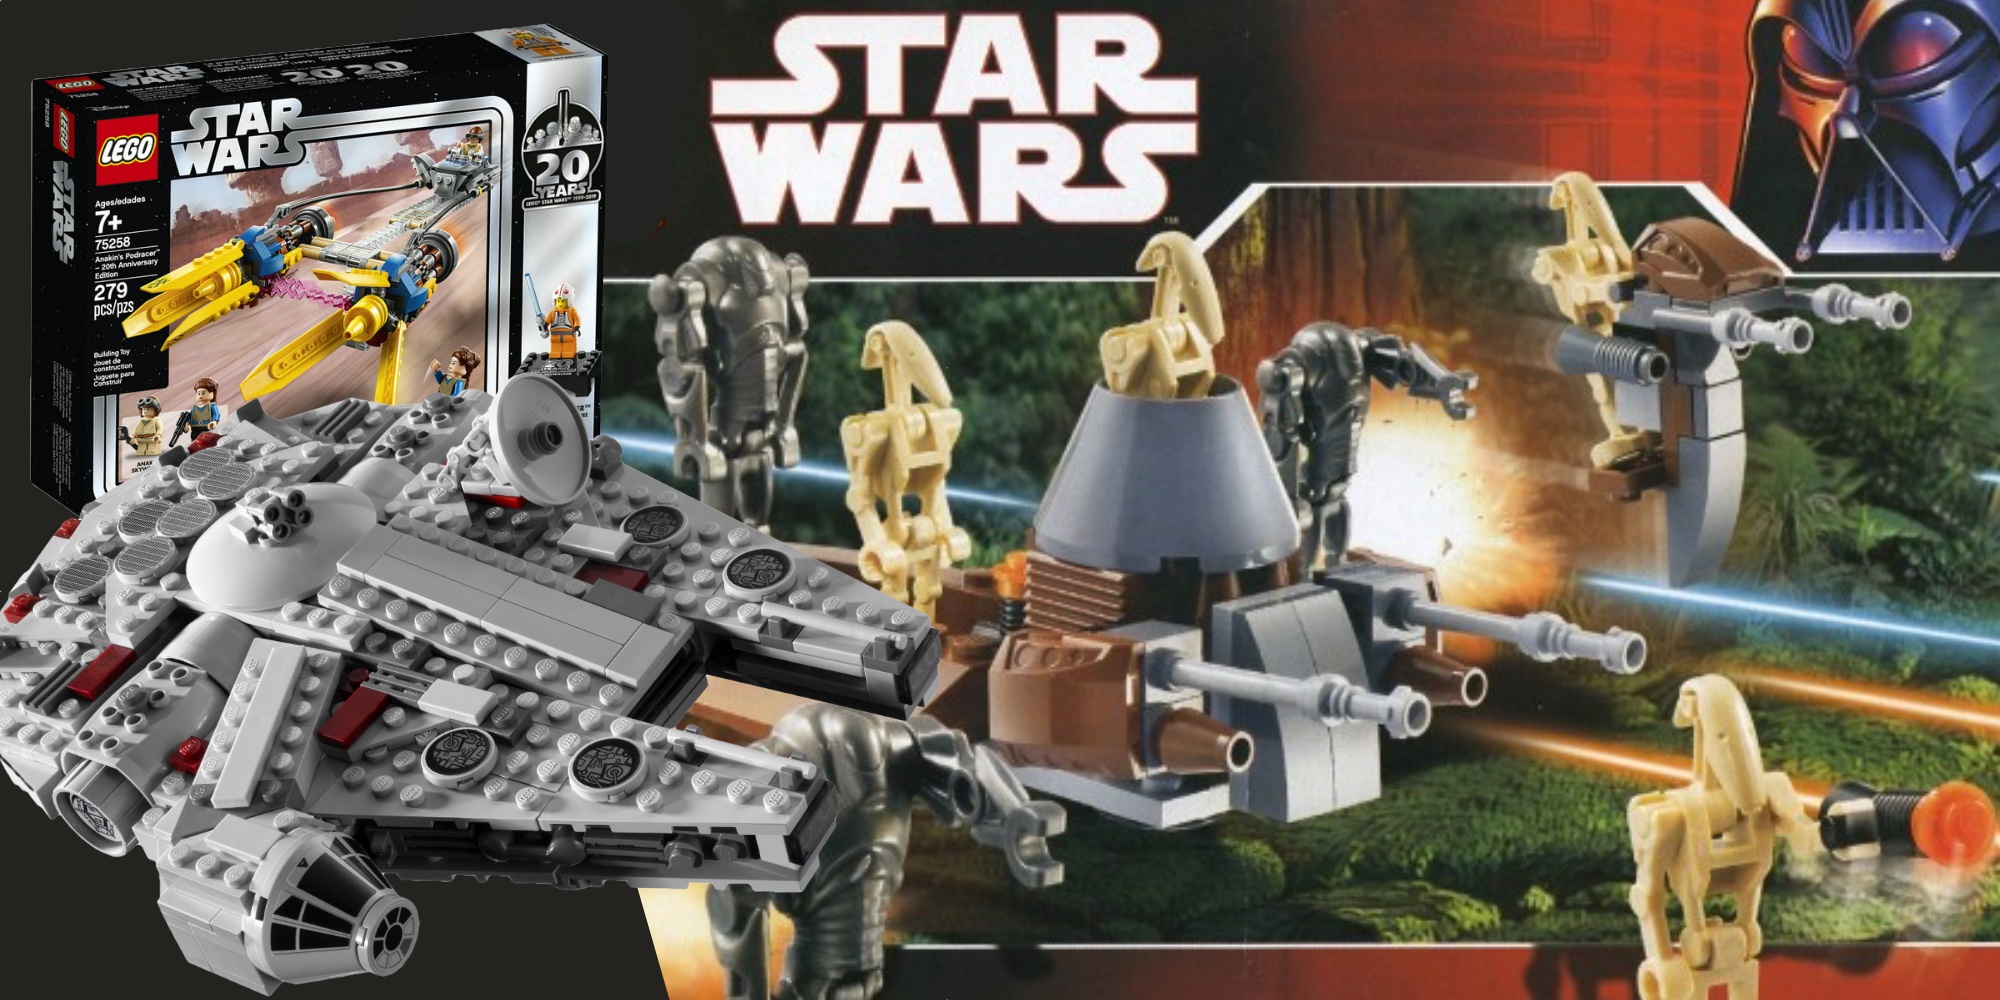 New LEGO Image Shows Many Minifigs For Star Wars: The Last Jedi